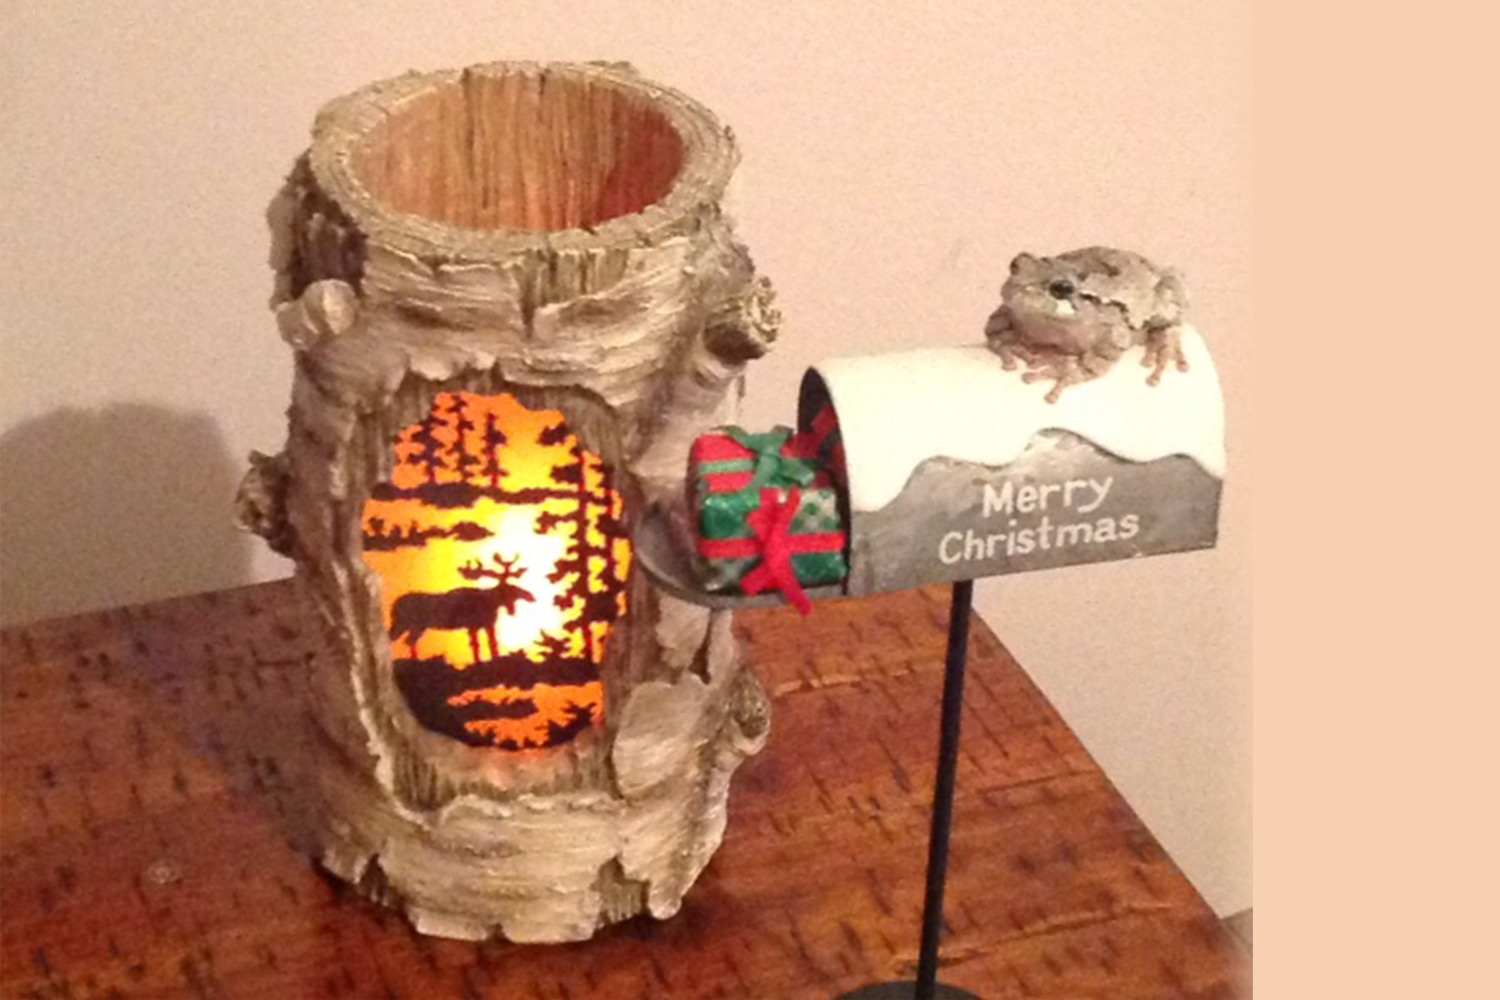 Todd the Toad has appeared to wish us all Merry Christmas!